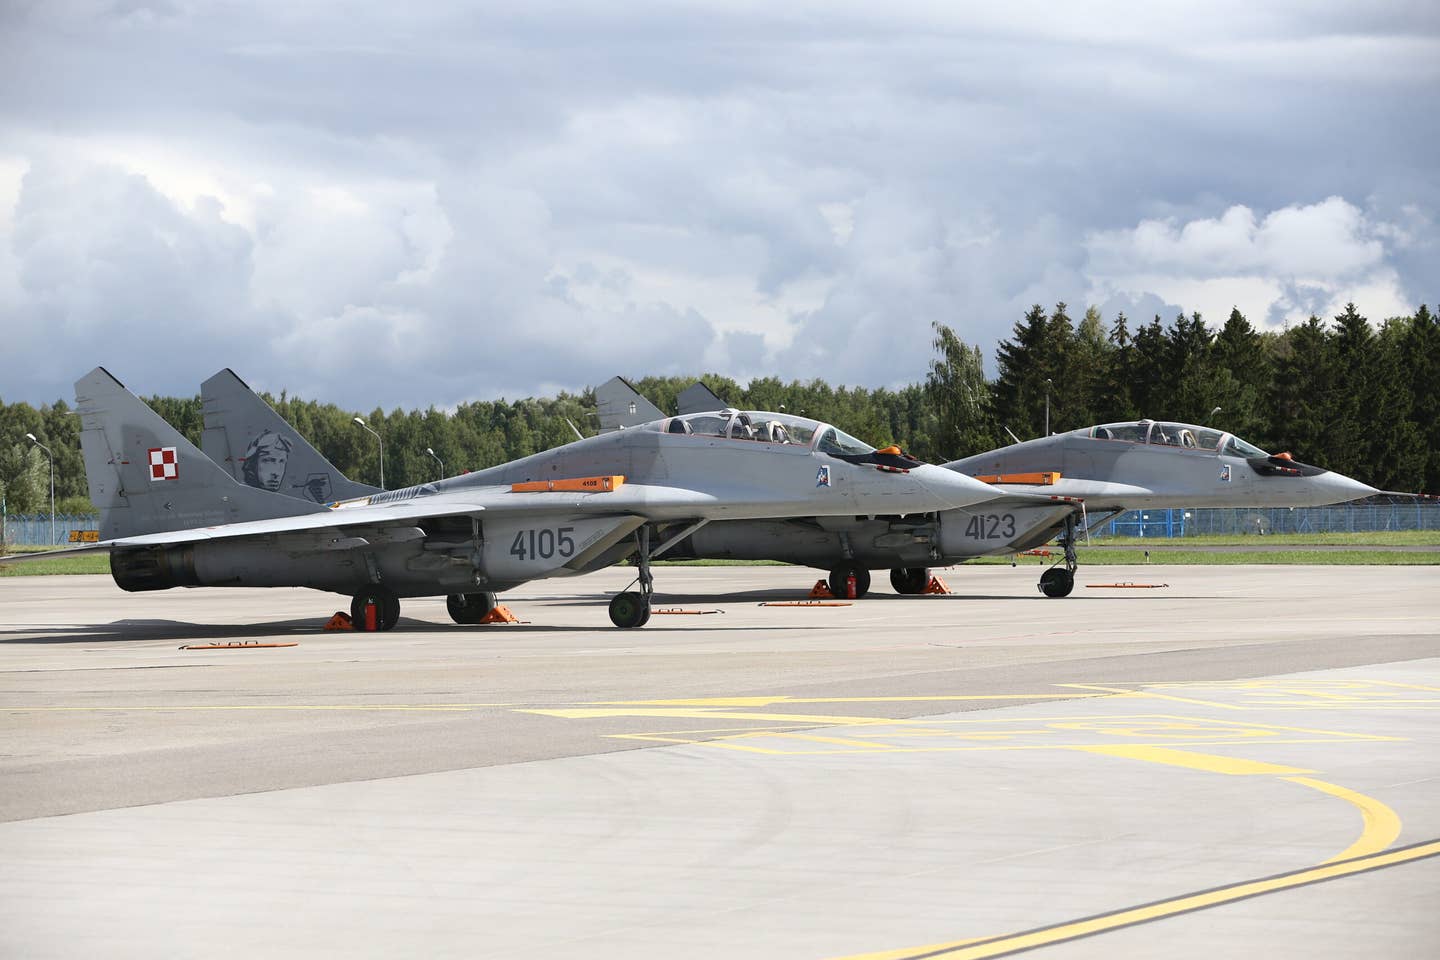 A pair of Polish Air Force two-seat MiG-29UBs at Malbork Air Base, Poland in August 2021. <em>Photo by Cuneyt Karadag/Anadolu Agency via Getty Images</em>